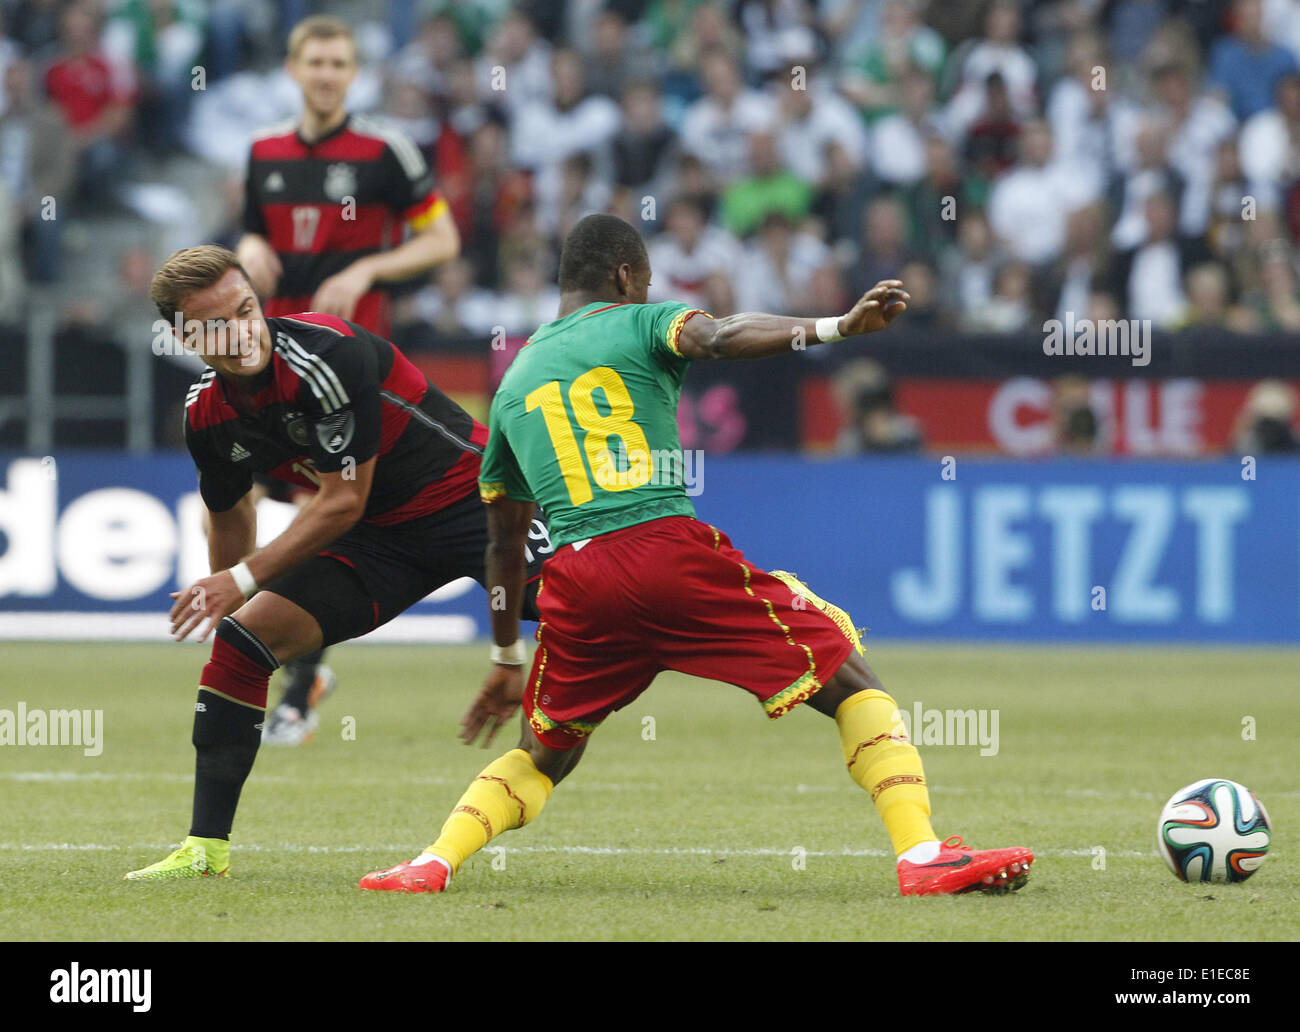 Moenchengladbach, Germany. 01st June, 2014. Germany's Mario Goetze (L) in action against Cameroon's Enoh Eyong during the friendly soccer match between Germany and Cameroon at the Borussia Park stadium in Moenchengladbach, Germany, 01 June 2014. Photo: Roland Weihrauch/dpa/Alamy Live News Stock Photo